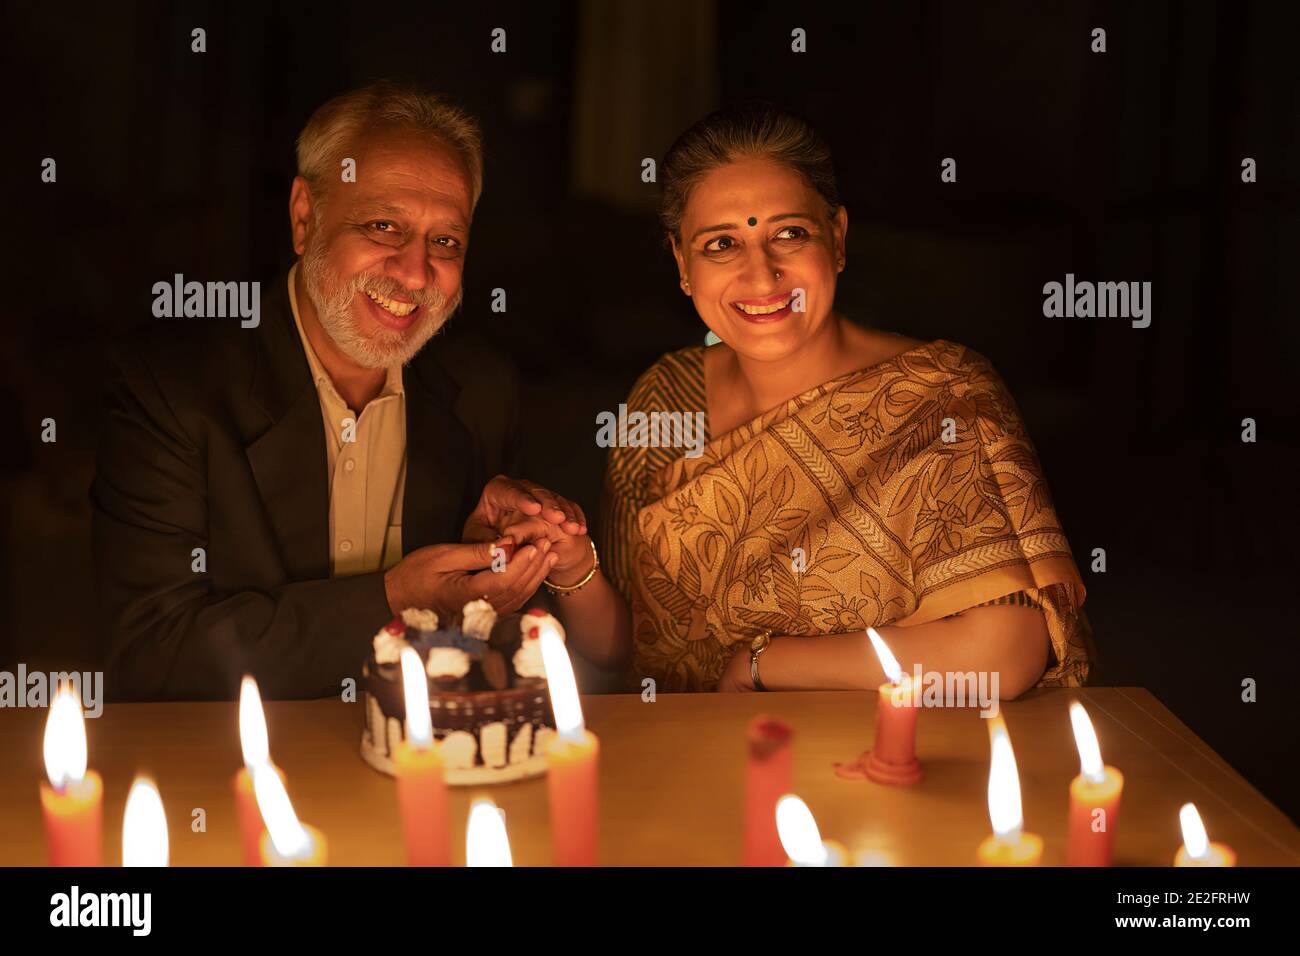 AN OLD COUPLE HAPPILY CUTTING CAKE ON THEIR ANNIVERSARY Stock Photo